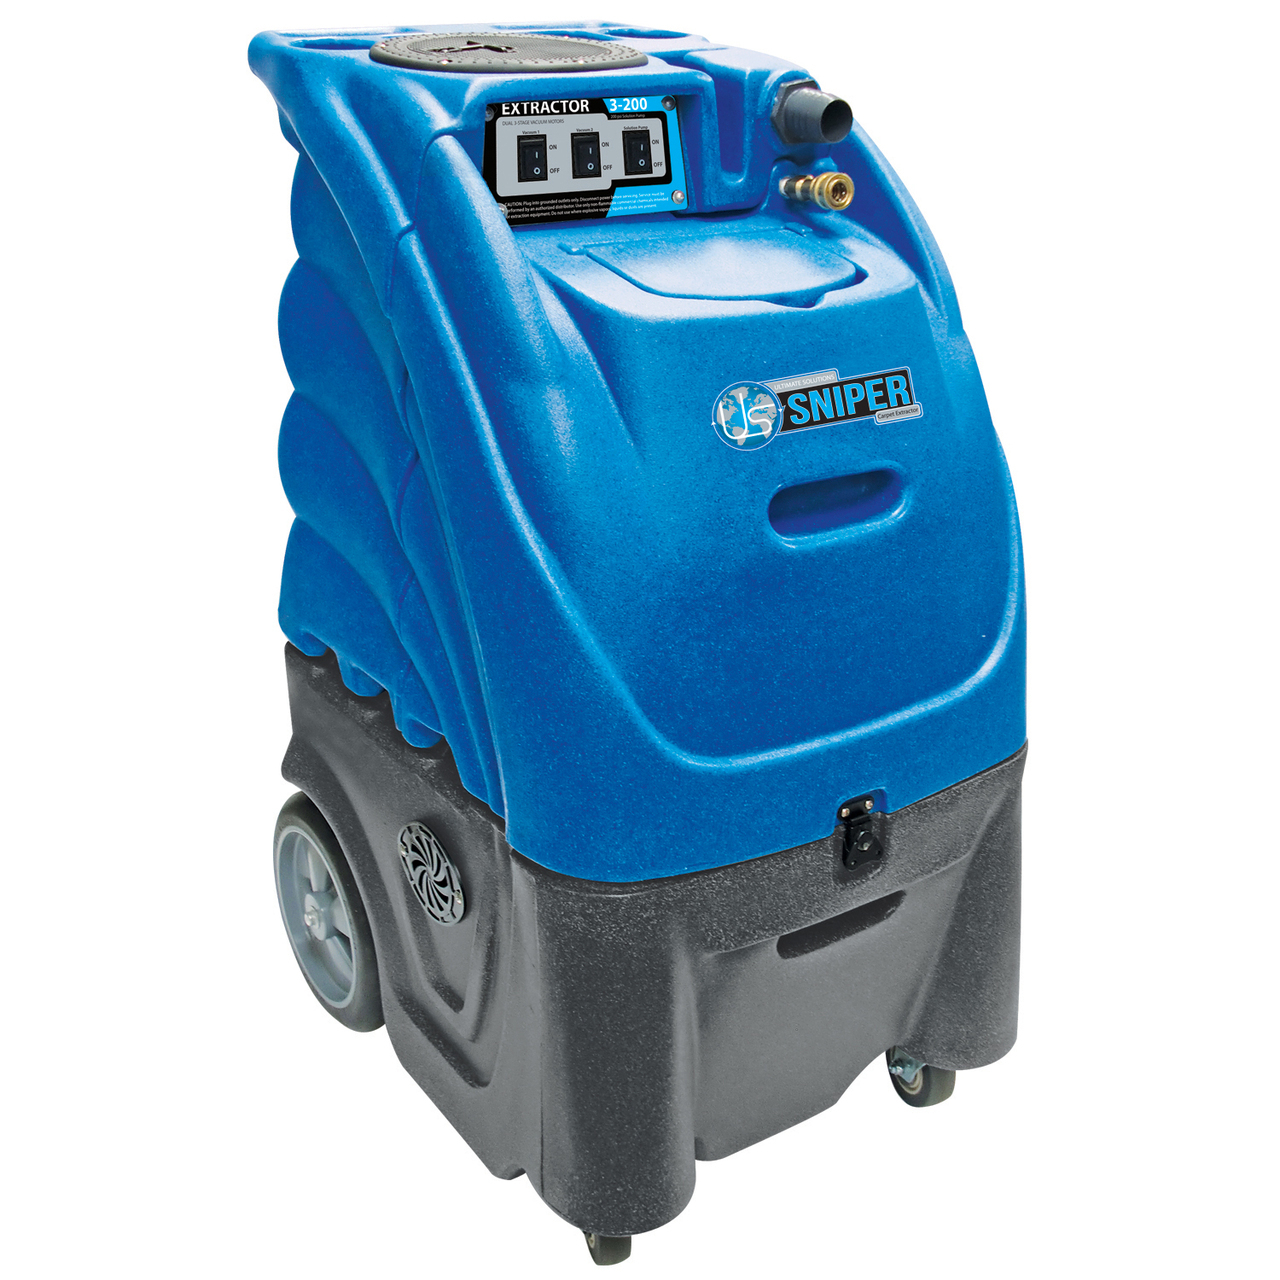 12 Gal 200 PSI 2 Stage Motor Heated Carpet Extractor